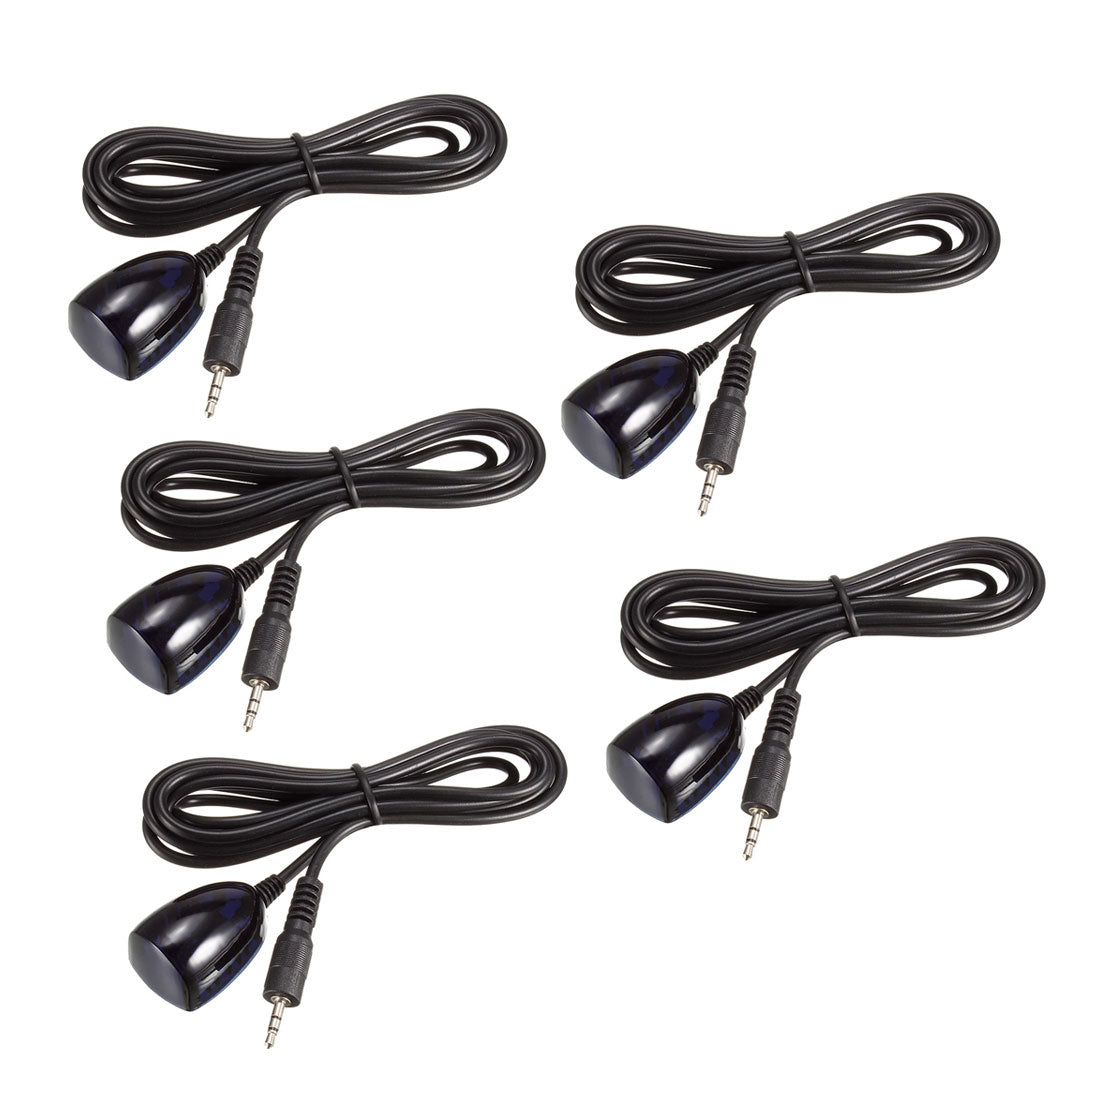 uxcell Uxcell 5pcs 2.5mm IR Remote Control Receiver Extension 1.5m 8-12m Receiving Distance